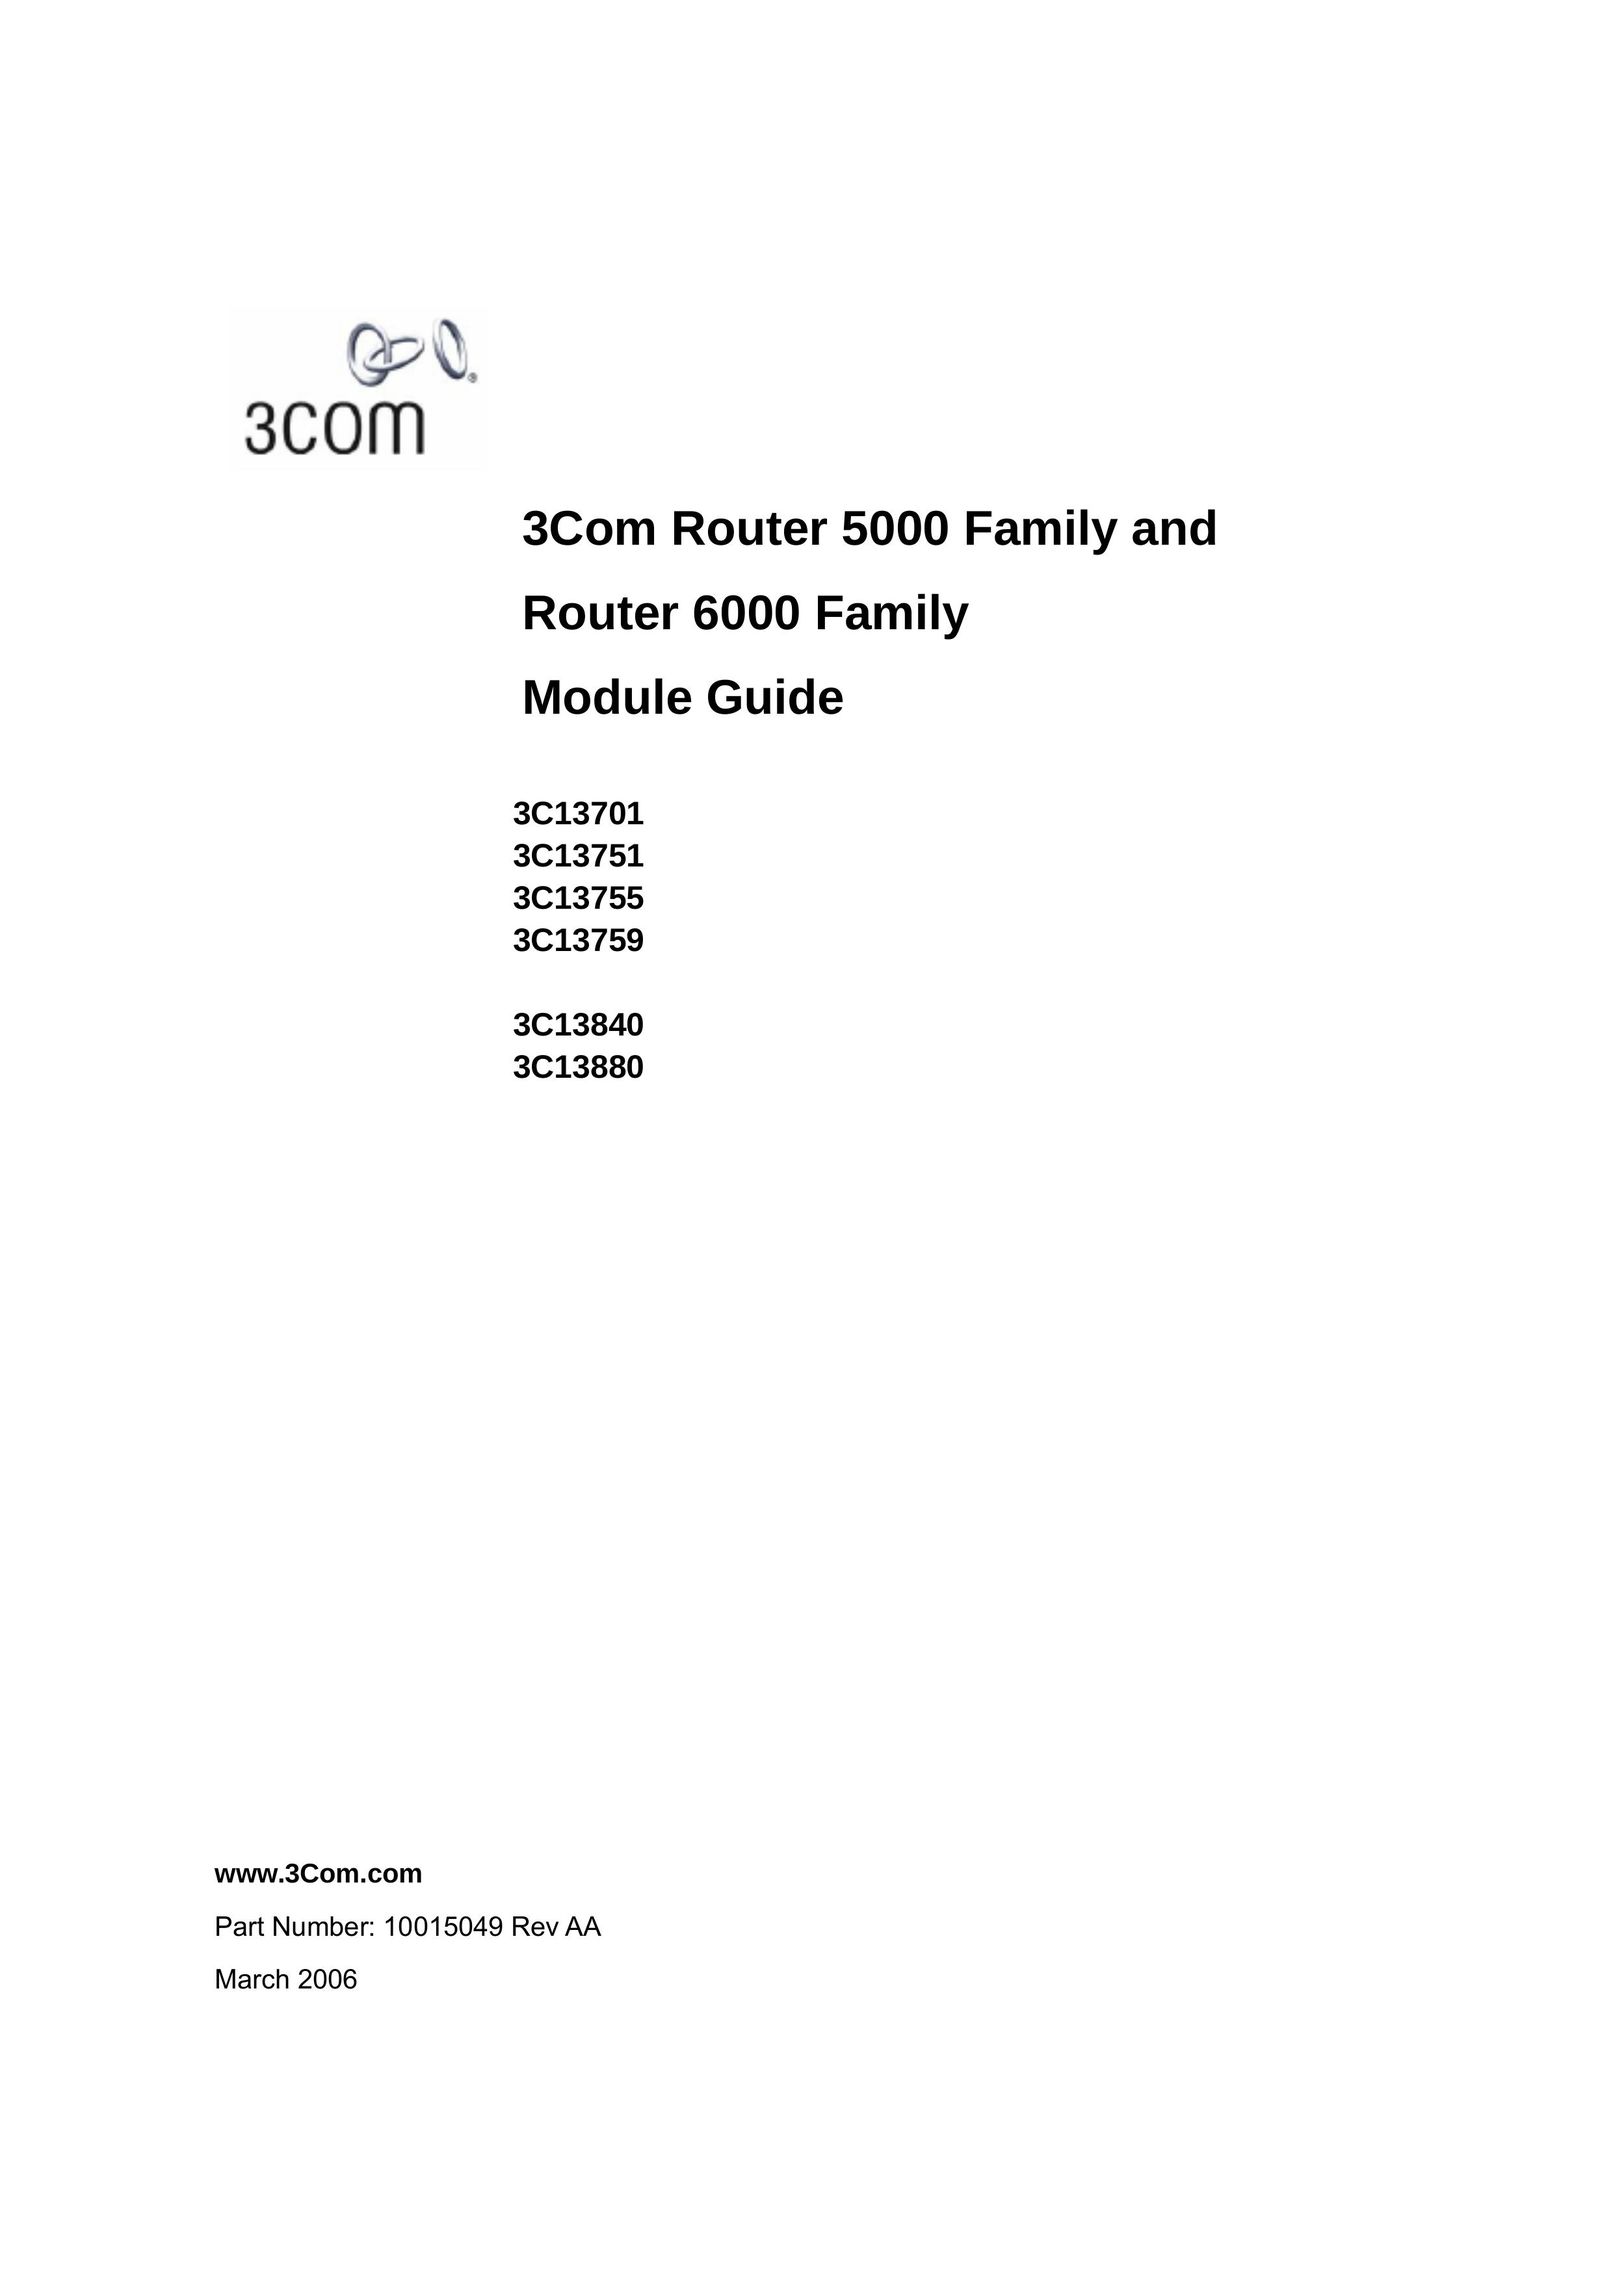 3Com 3C13840 Network Router User Manual